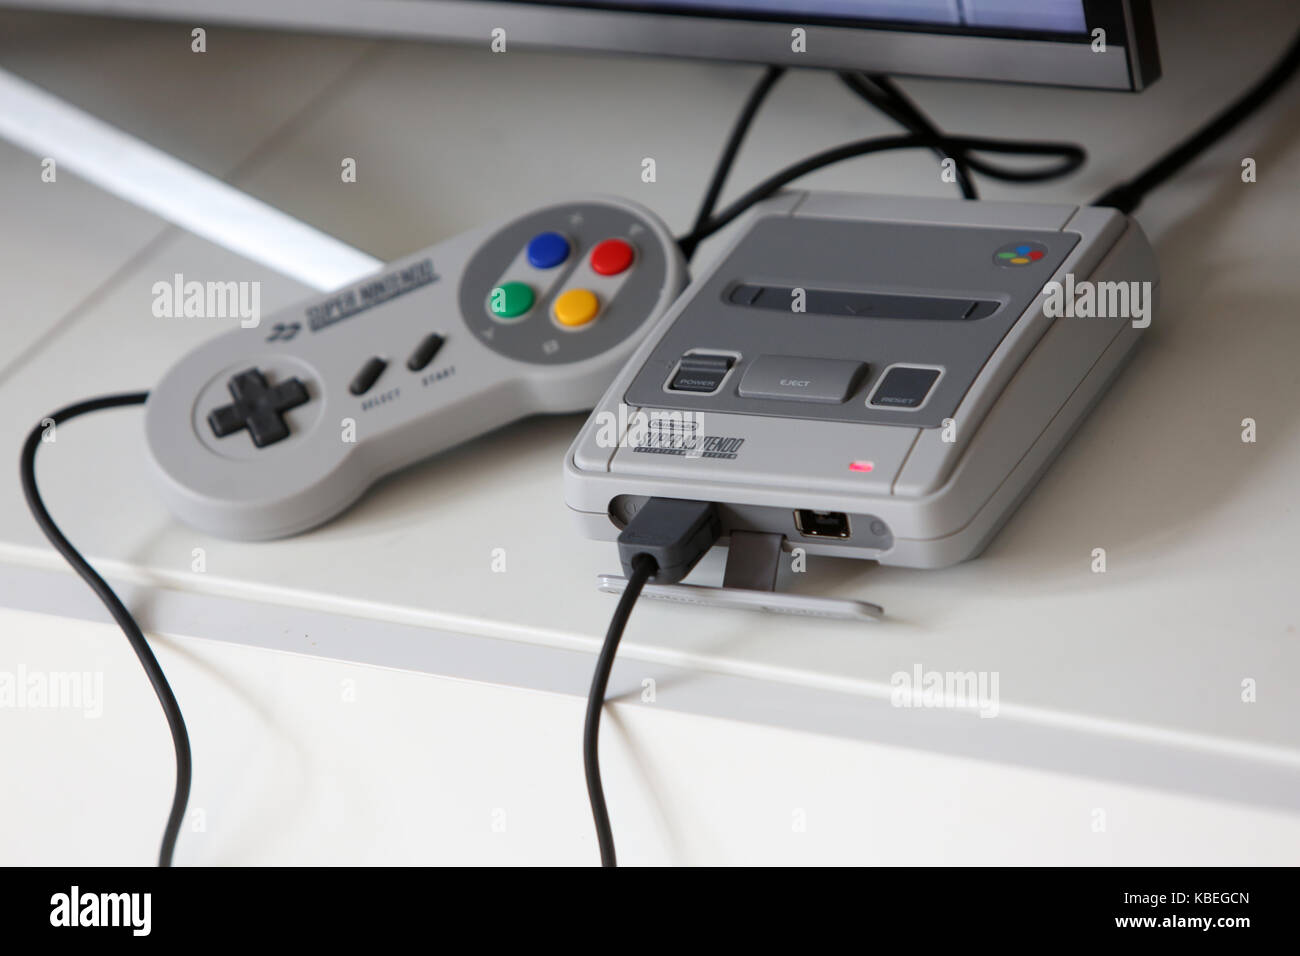 The new Nintendo SNES Mini, (Super Nintendo Entertainment System) pictured  at a home in Chichester, West Sussex, UK Stock Photo - Alamy